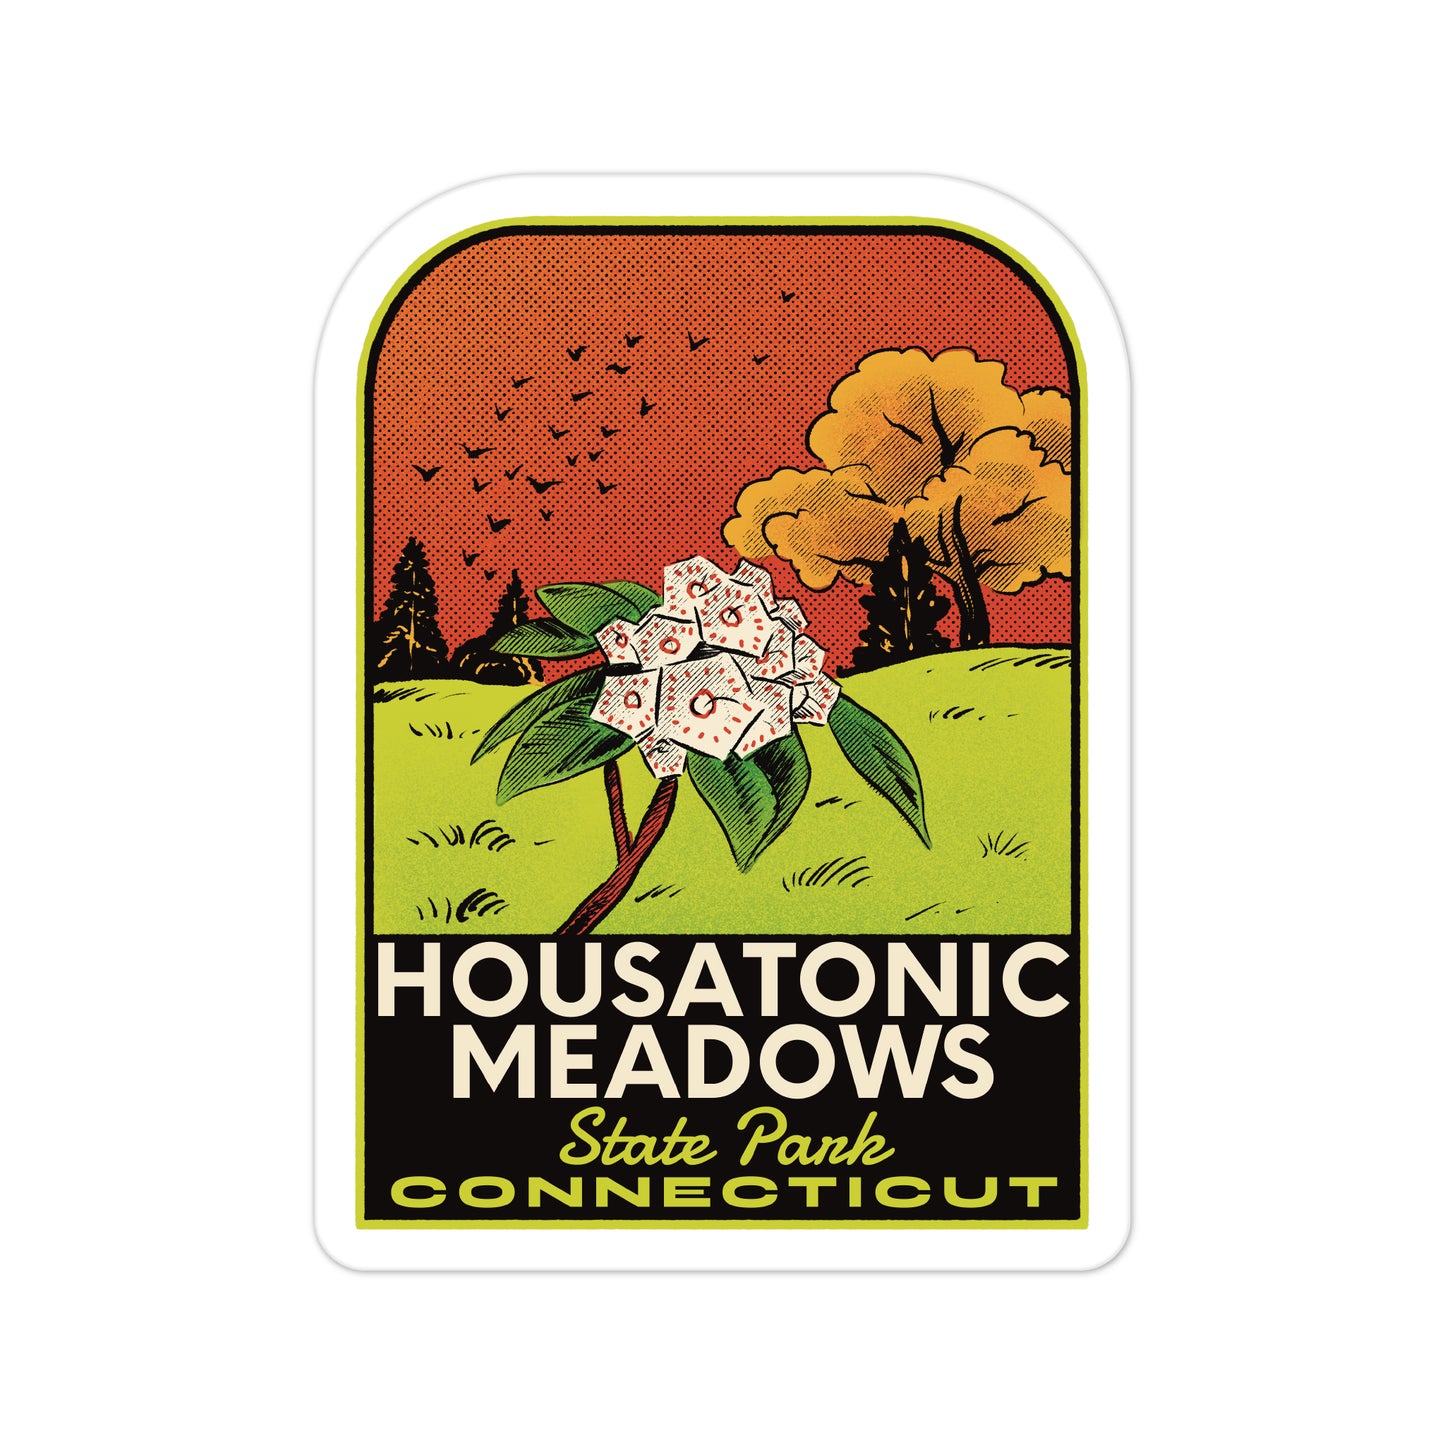 A sticker of Housatonic Meadows State Park